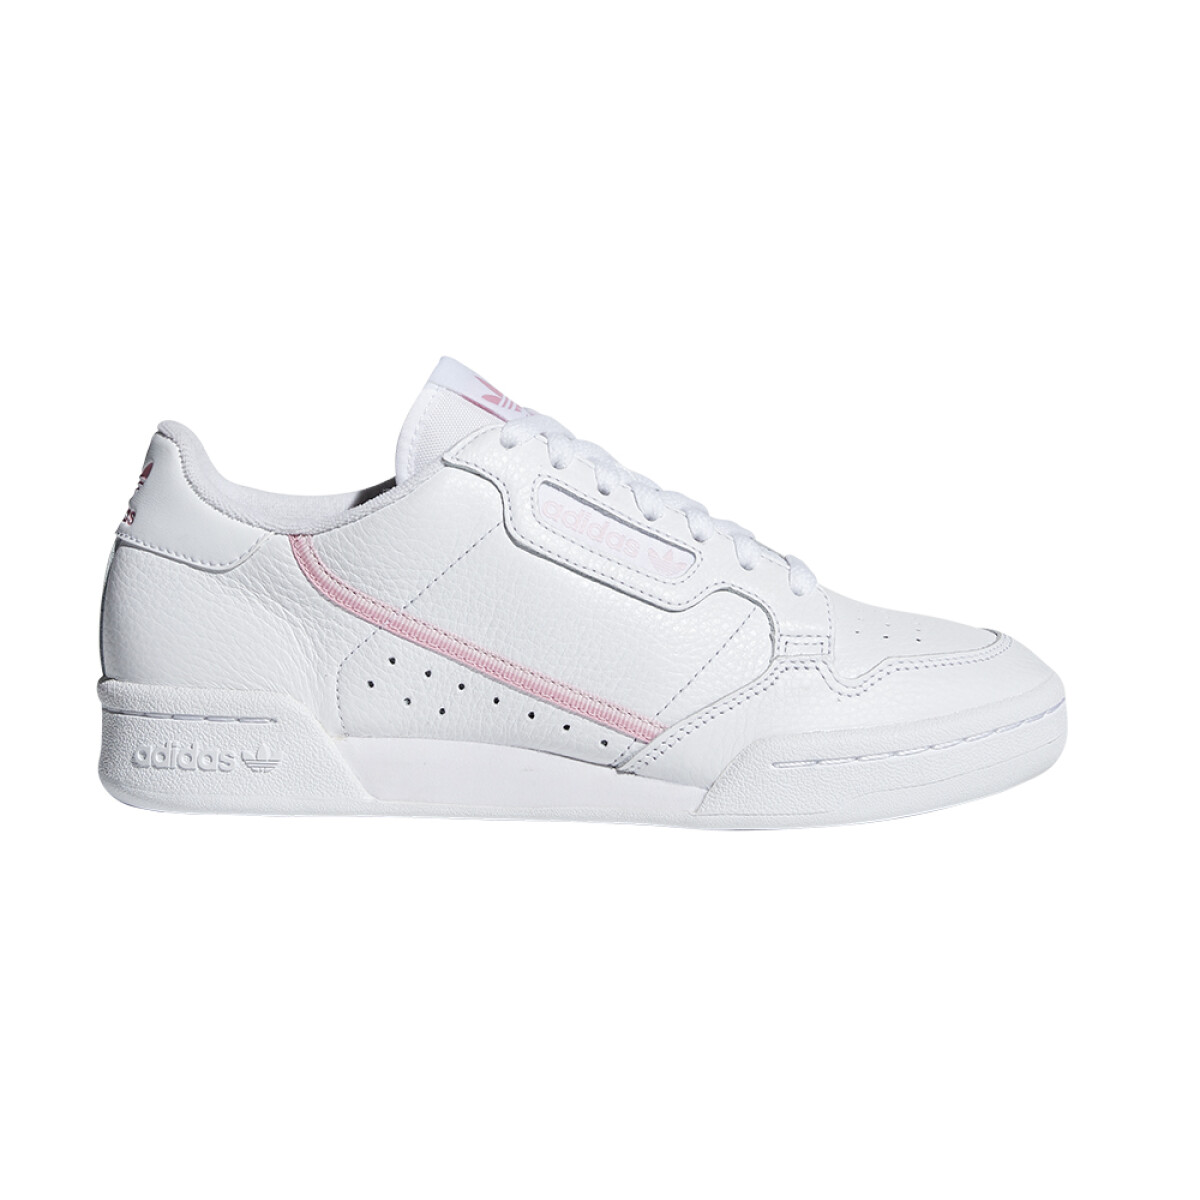 adidas CONTINENTAL 80 - White/Pink 